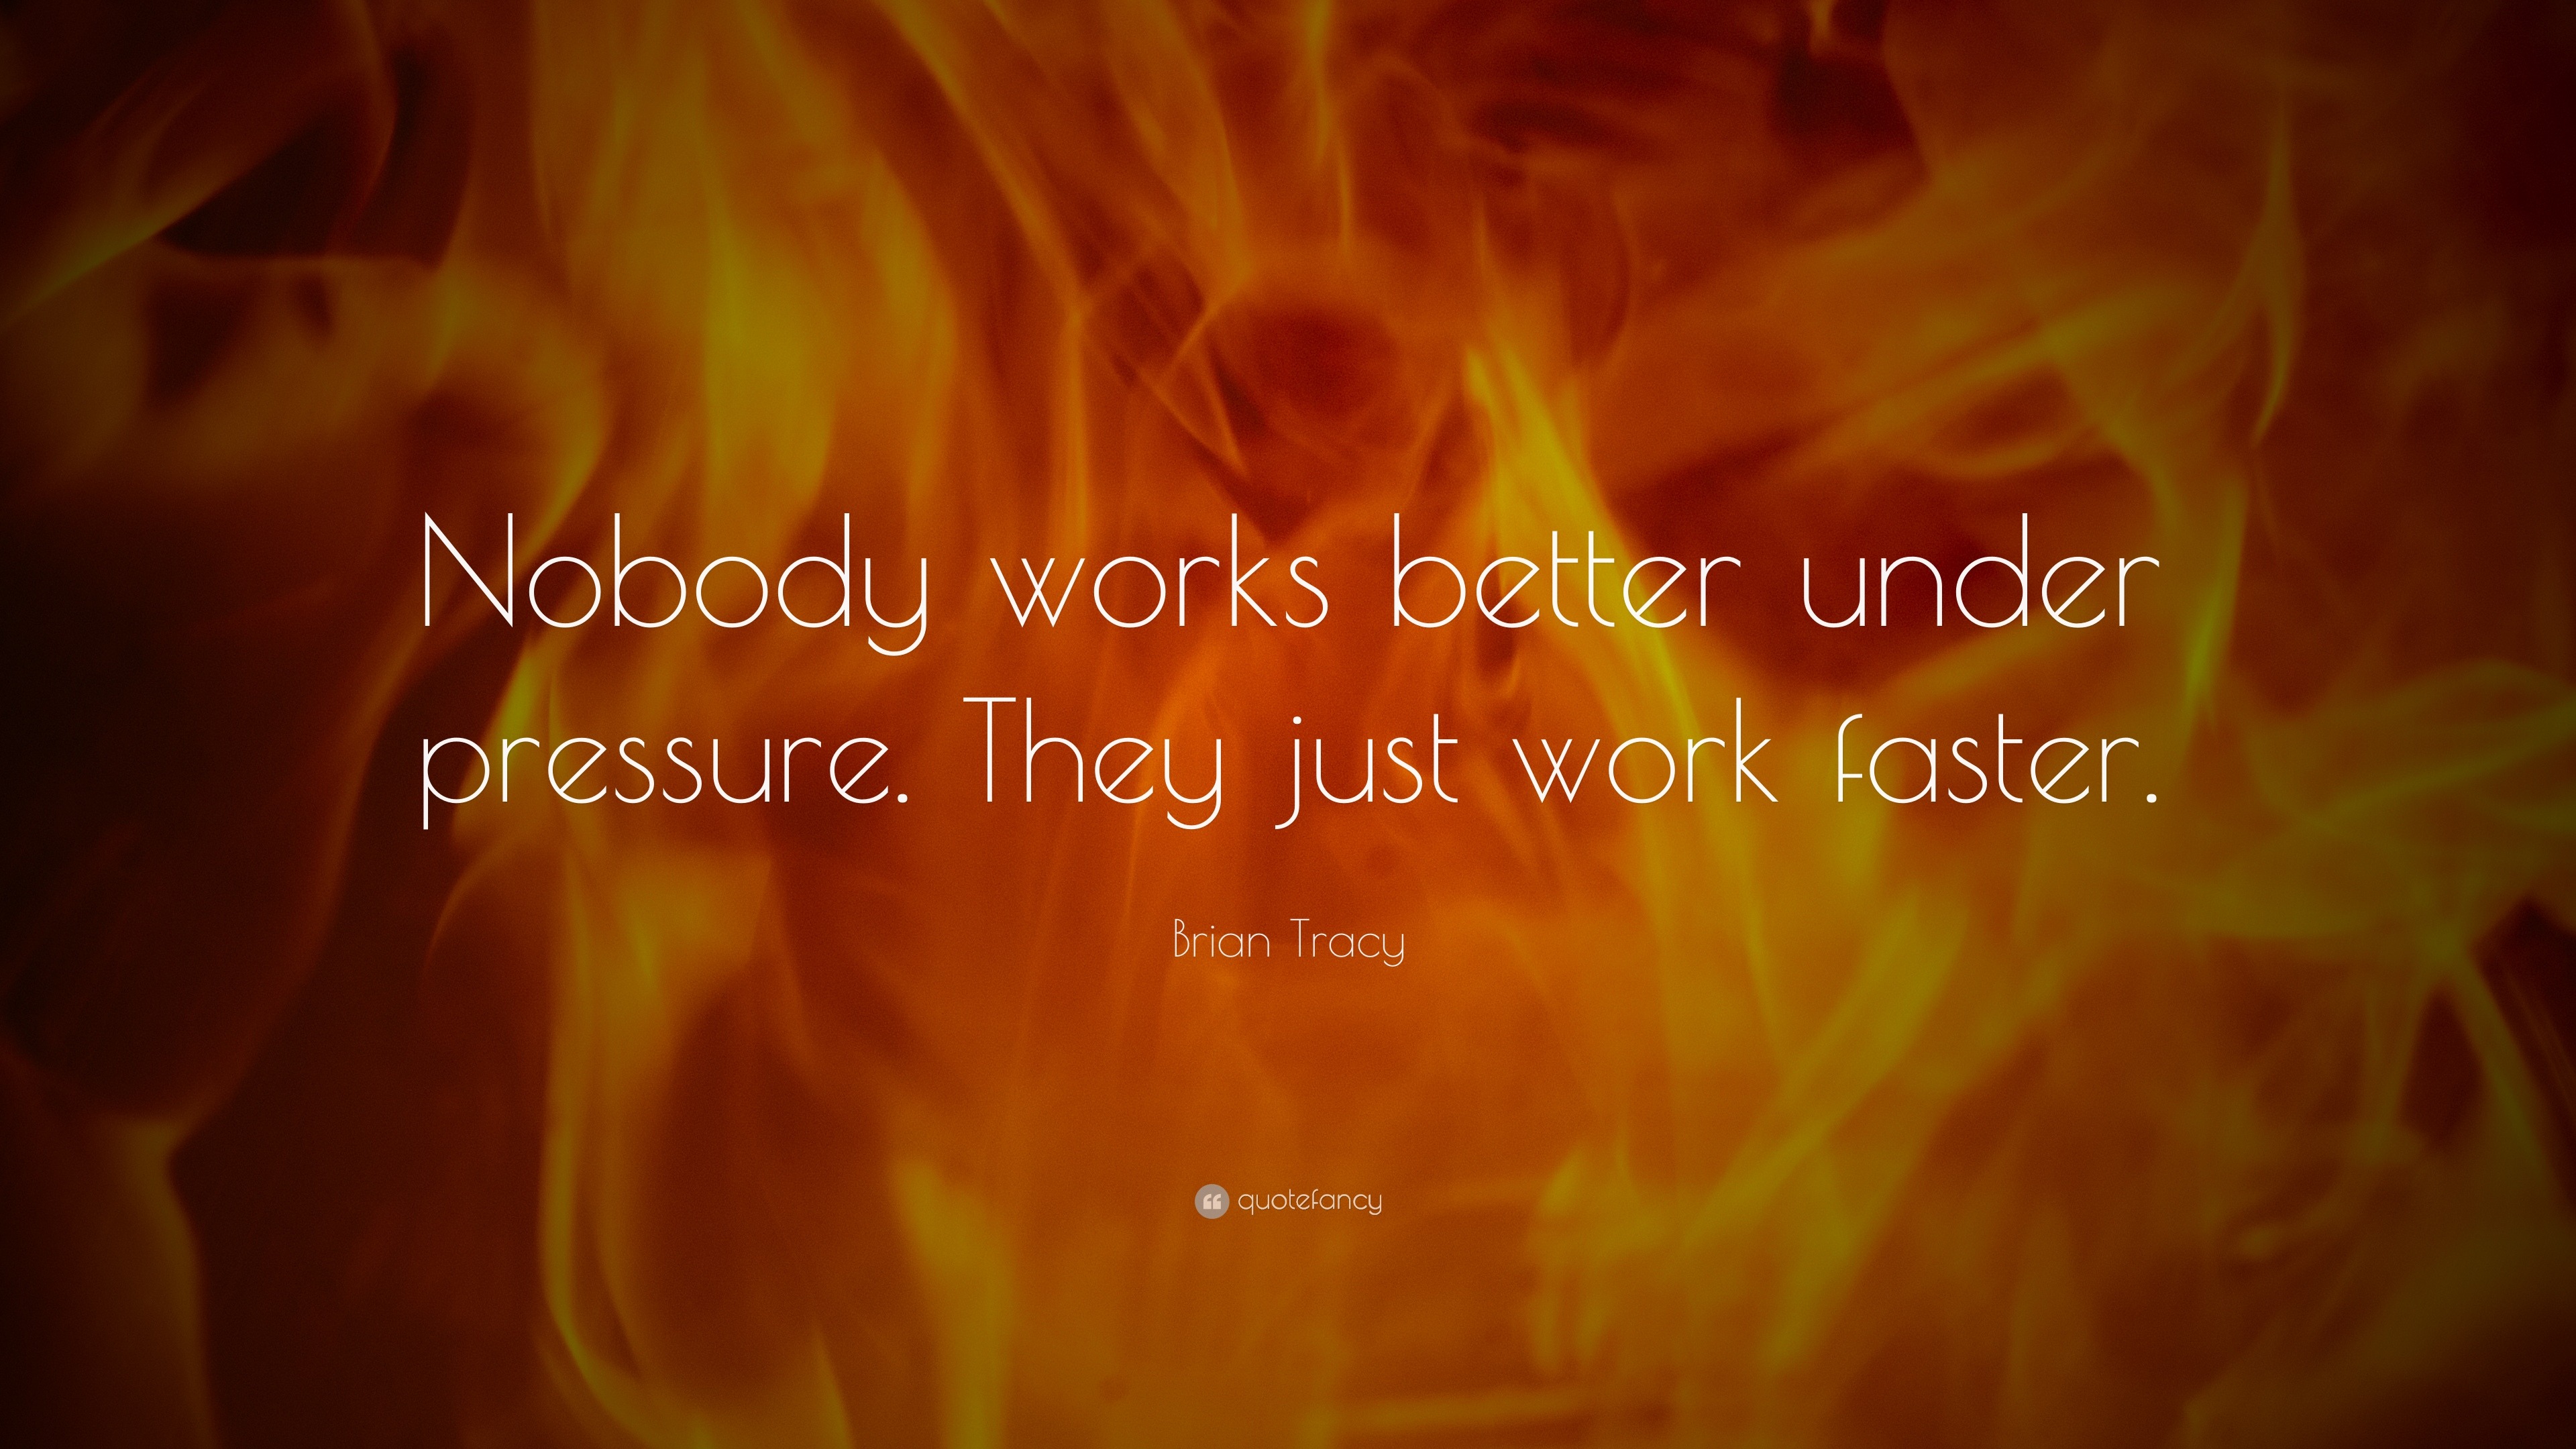 https://quotefancy.com/media/wallpaper/3840x2160/14479-Brian-Tracy-Quote-Nobody-works-better-under-pressure-They-just.jpg